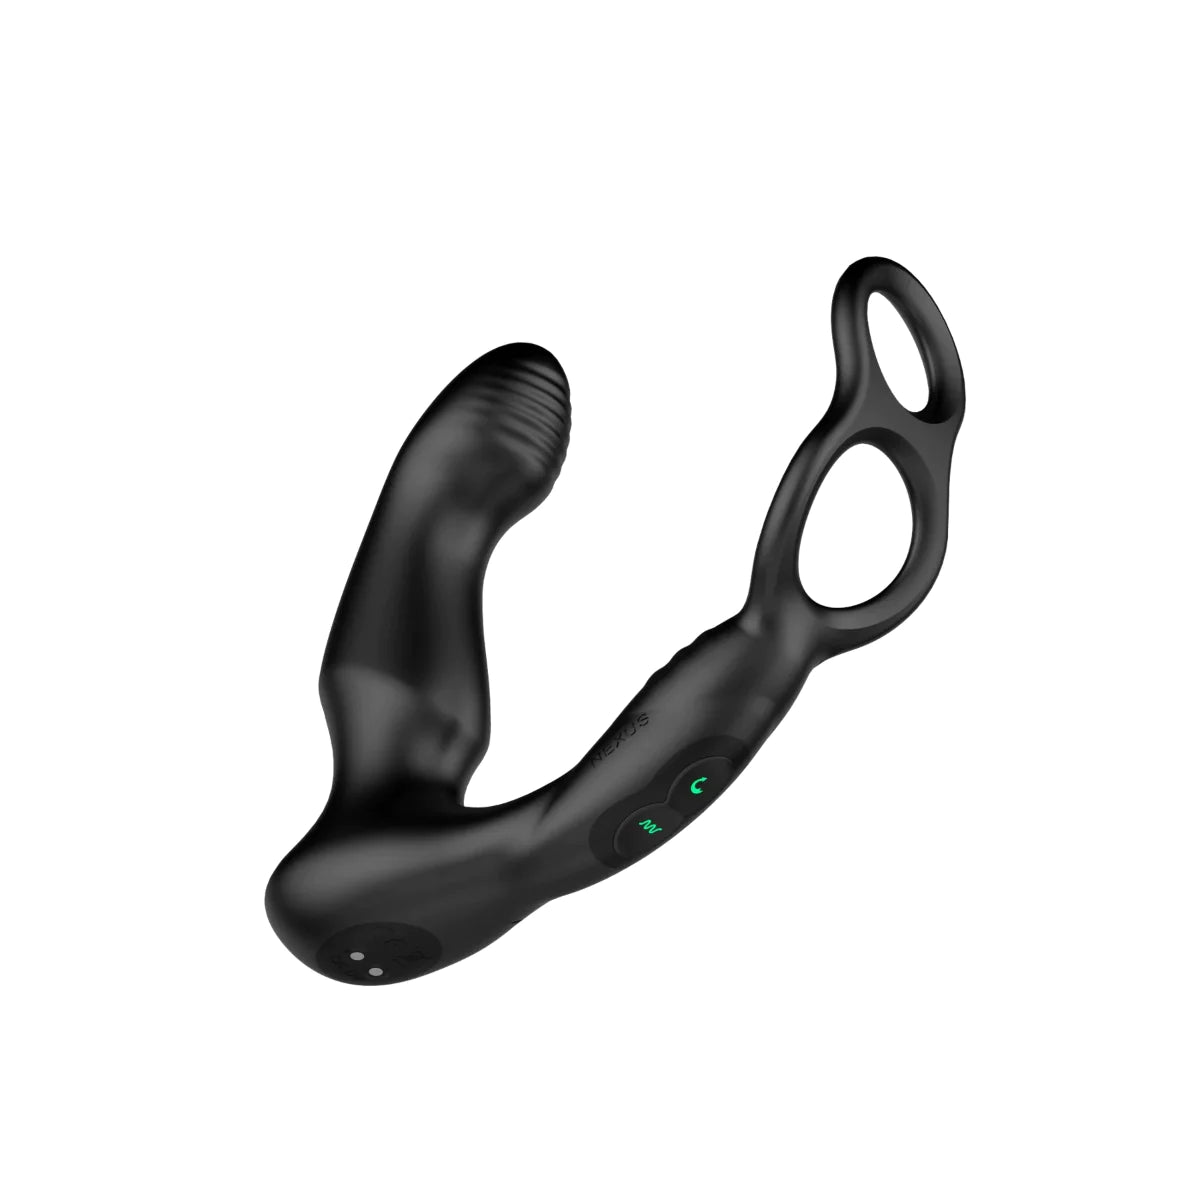 Nexus | SIMUL8 WAVE EDITION Vibrating Dual Motor Anal Cock and Ball Toy - Black